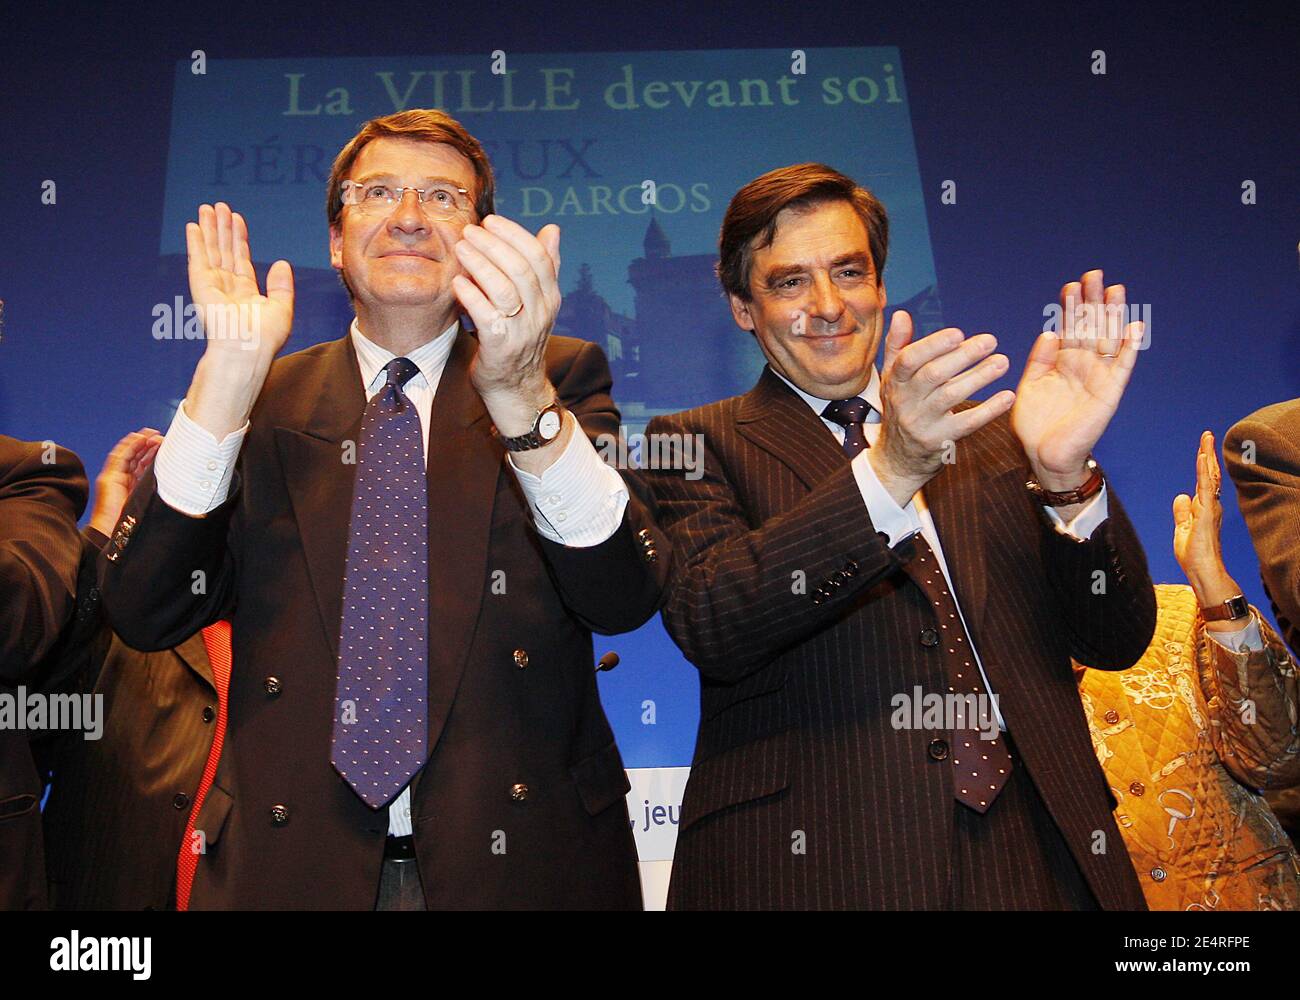 Francois Fillon attends a rally to support Xavier Darcos for the upcoming mayoral election in Perigueux, France, on March 13, 2008. Photo by Patrick Bernard/ABACAPRESS.COM Stock Photo